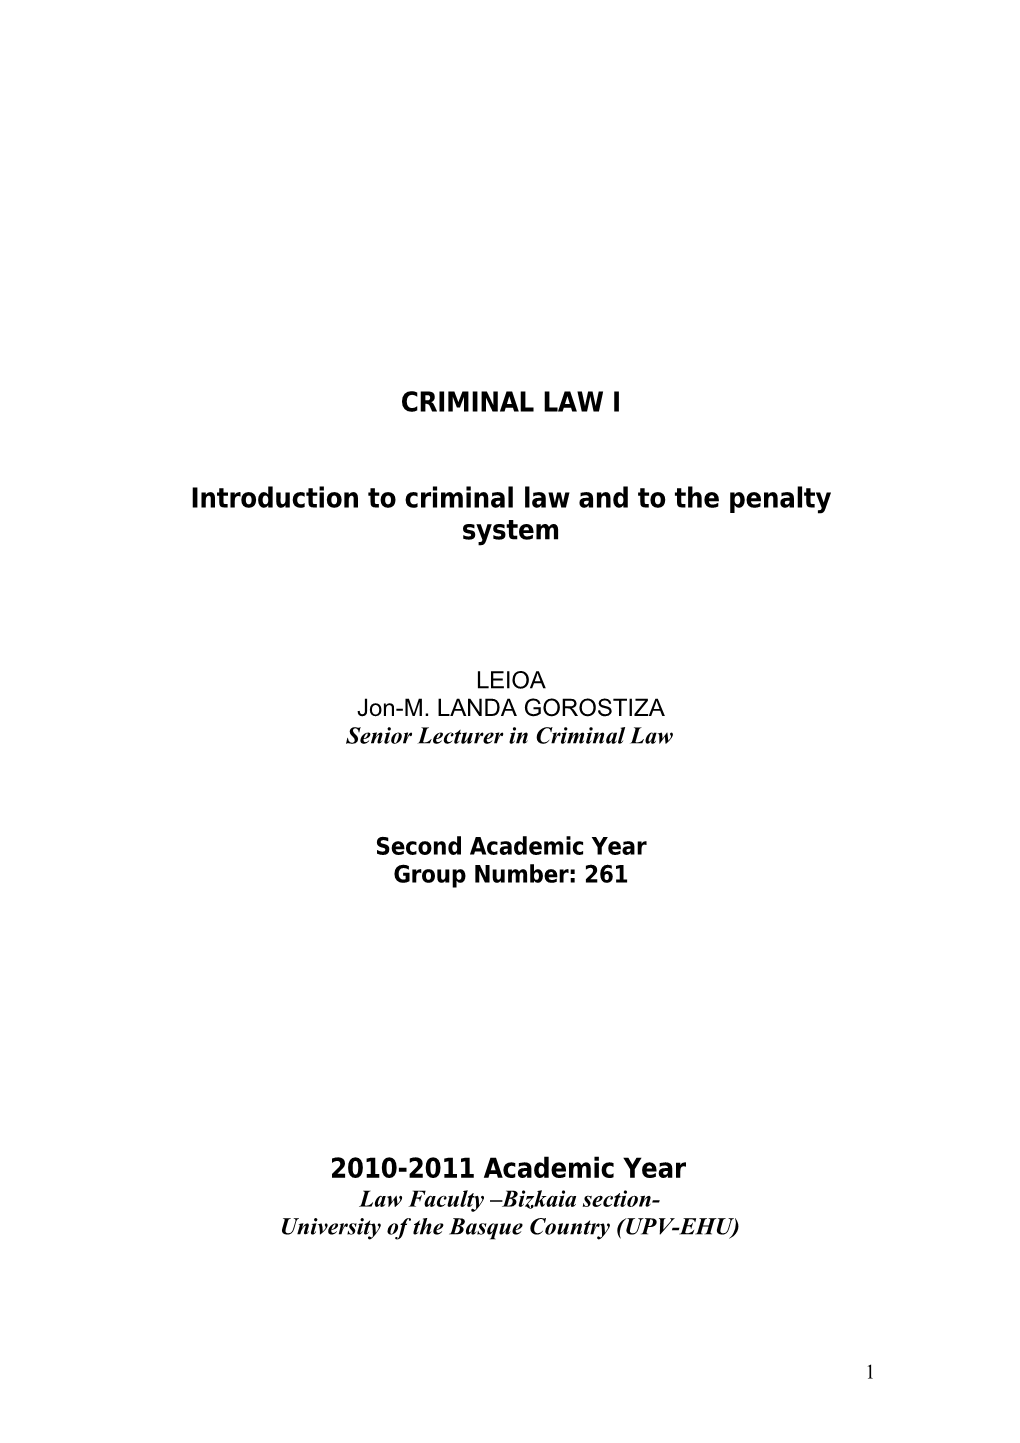 Introduction to Criminal Law and to the Penalty System